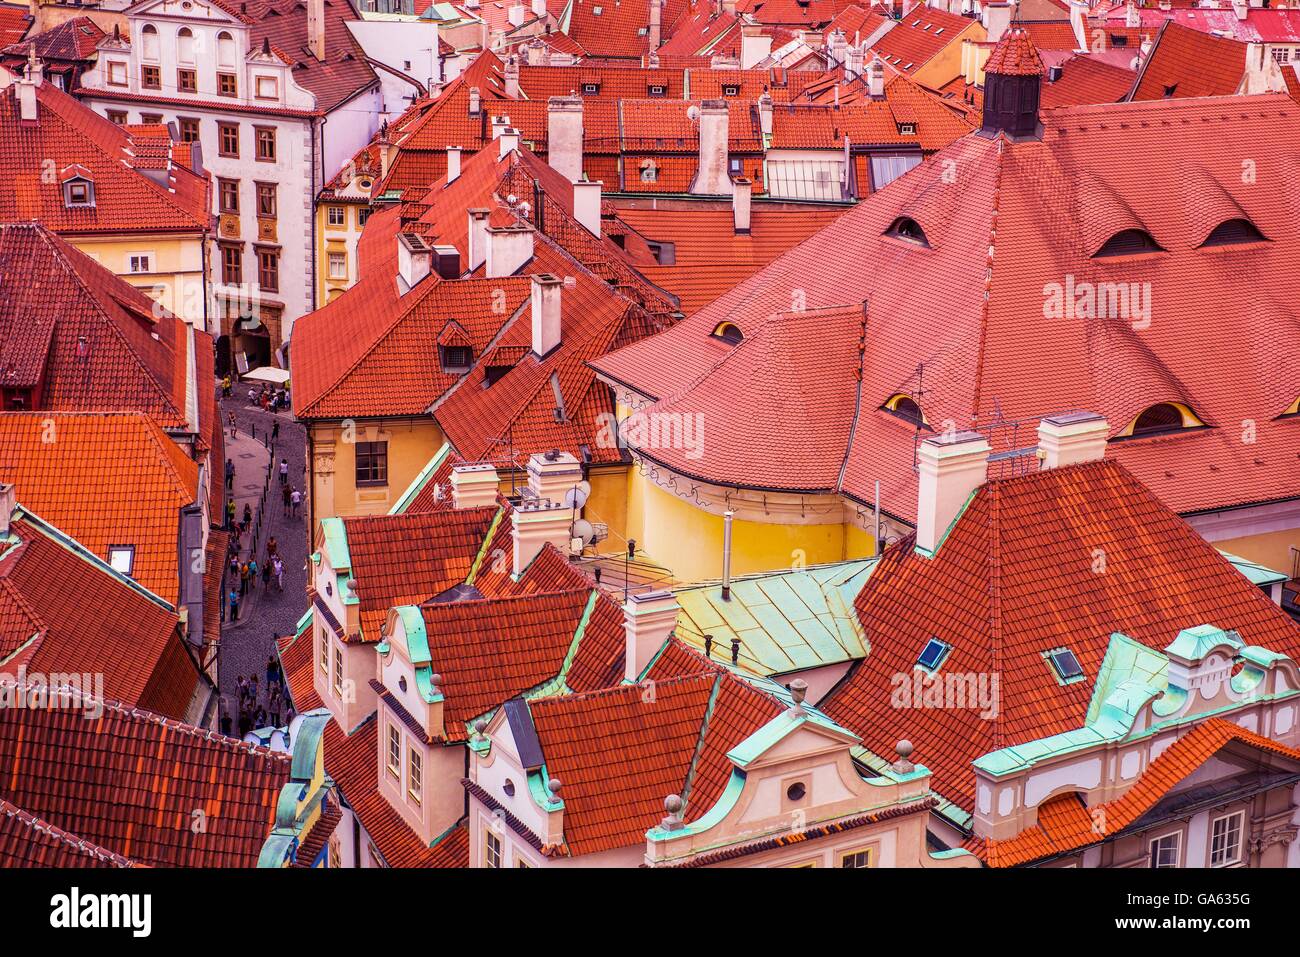 Prague Czechia Architecture. Old Town Buildings Roofs From Bird View. Prague, Czech Republic, Europe. Stock Photo